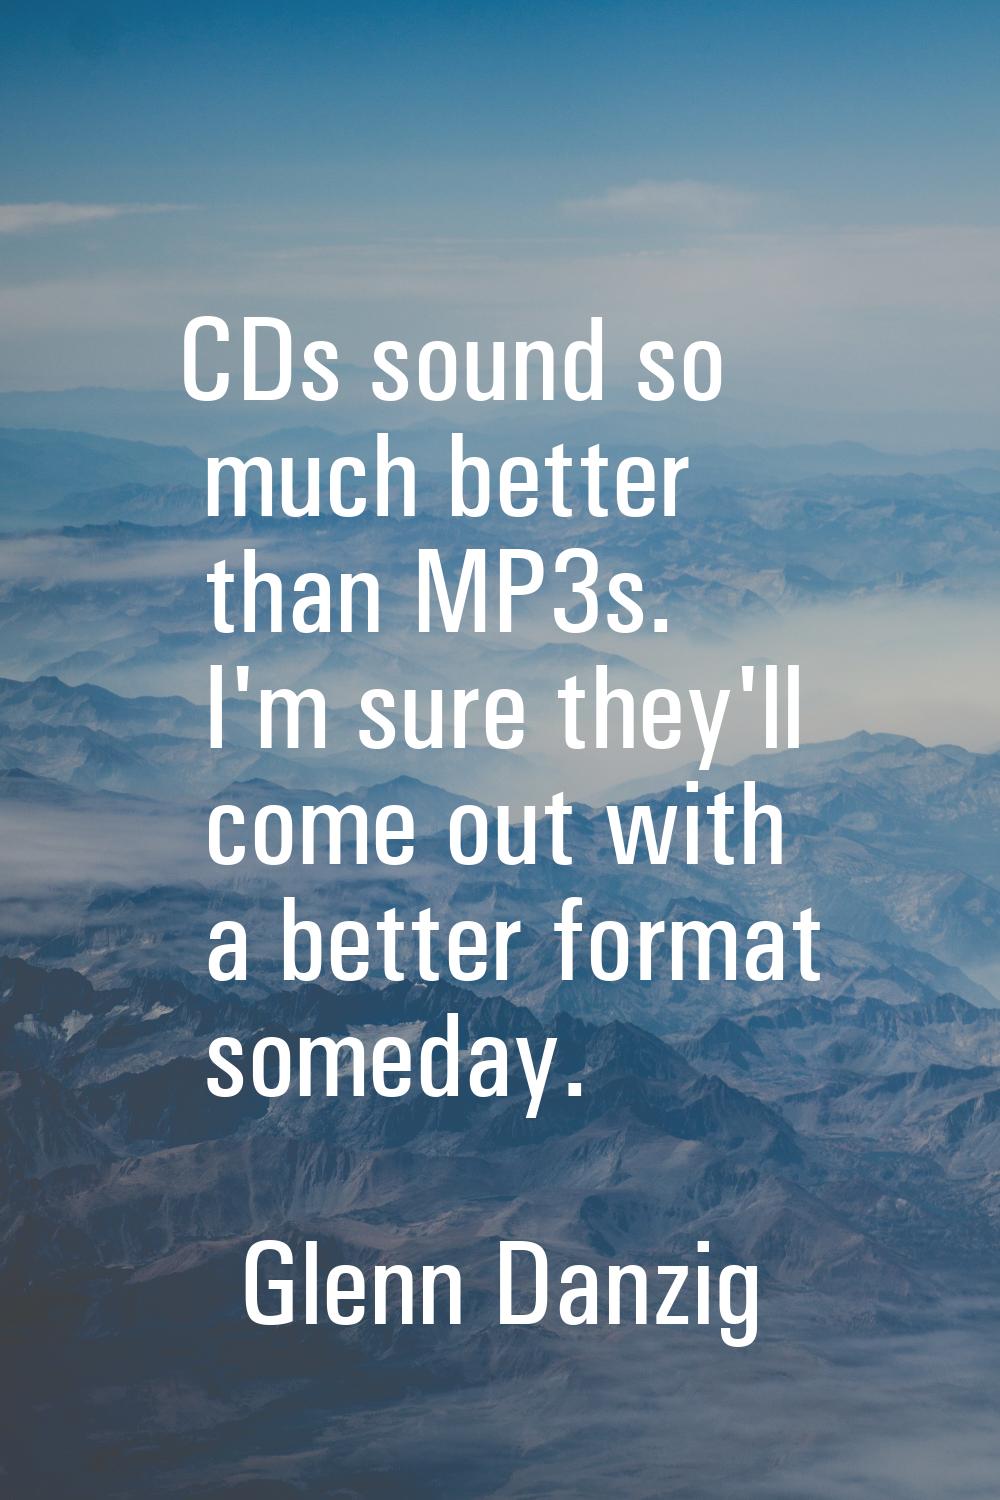 CDs sound so much better than MP3s. I'm sure they'll come out with a better format someday.